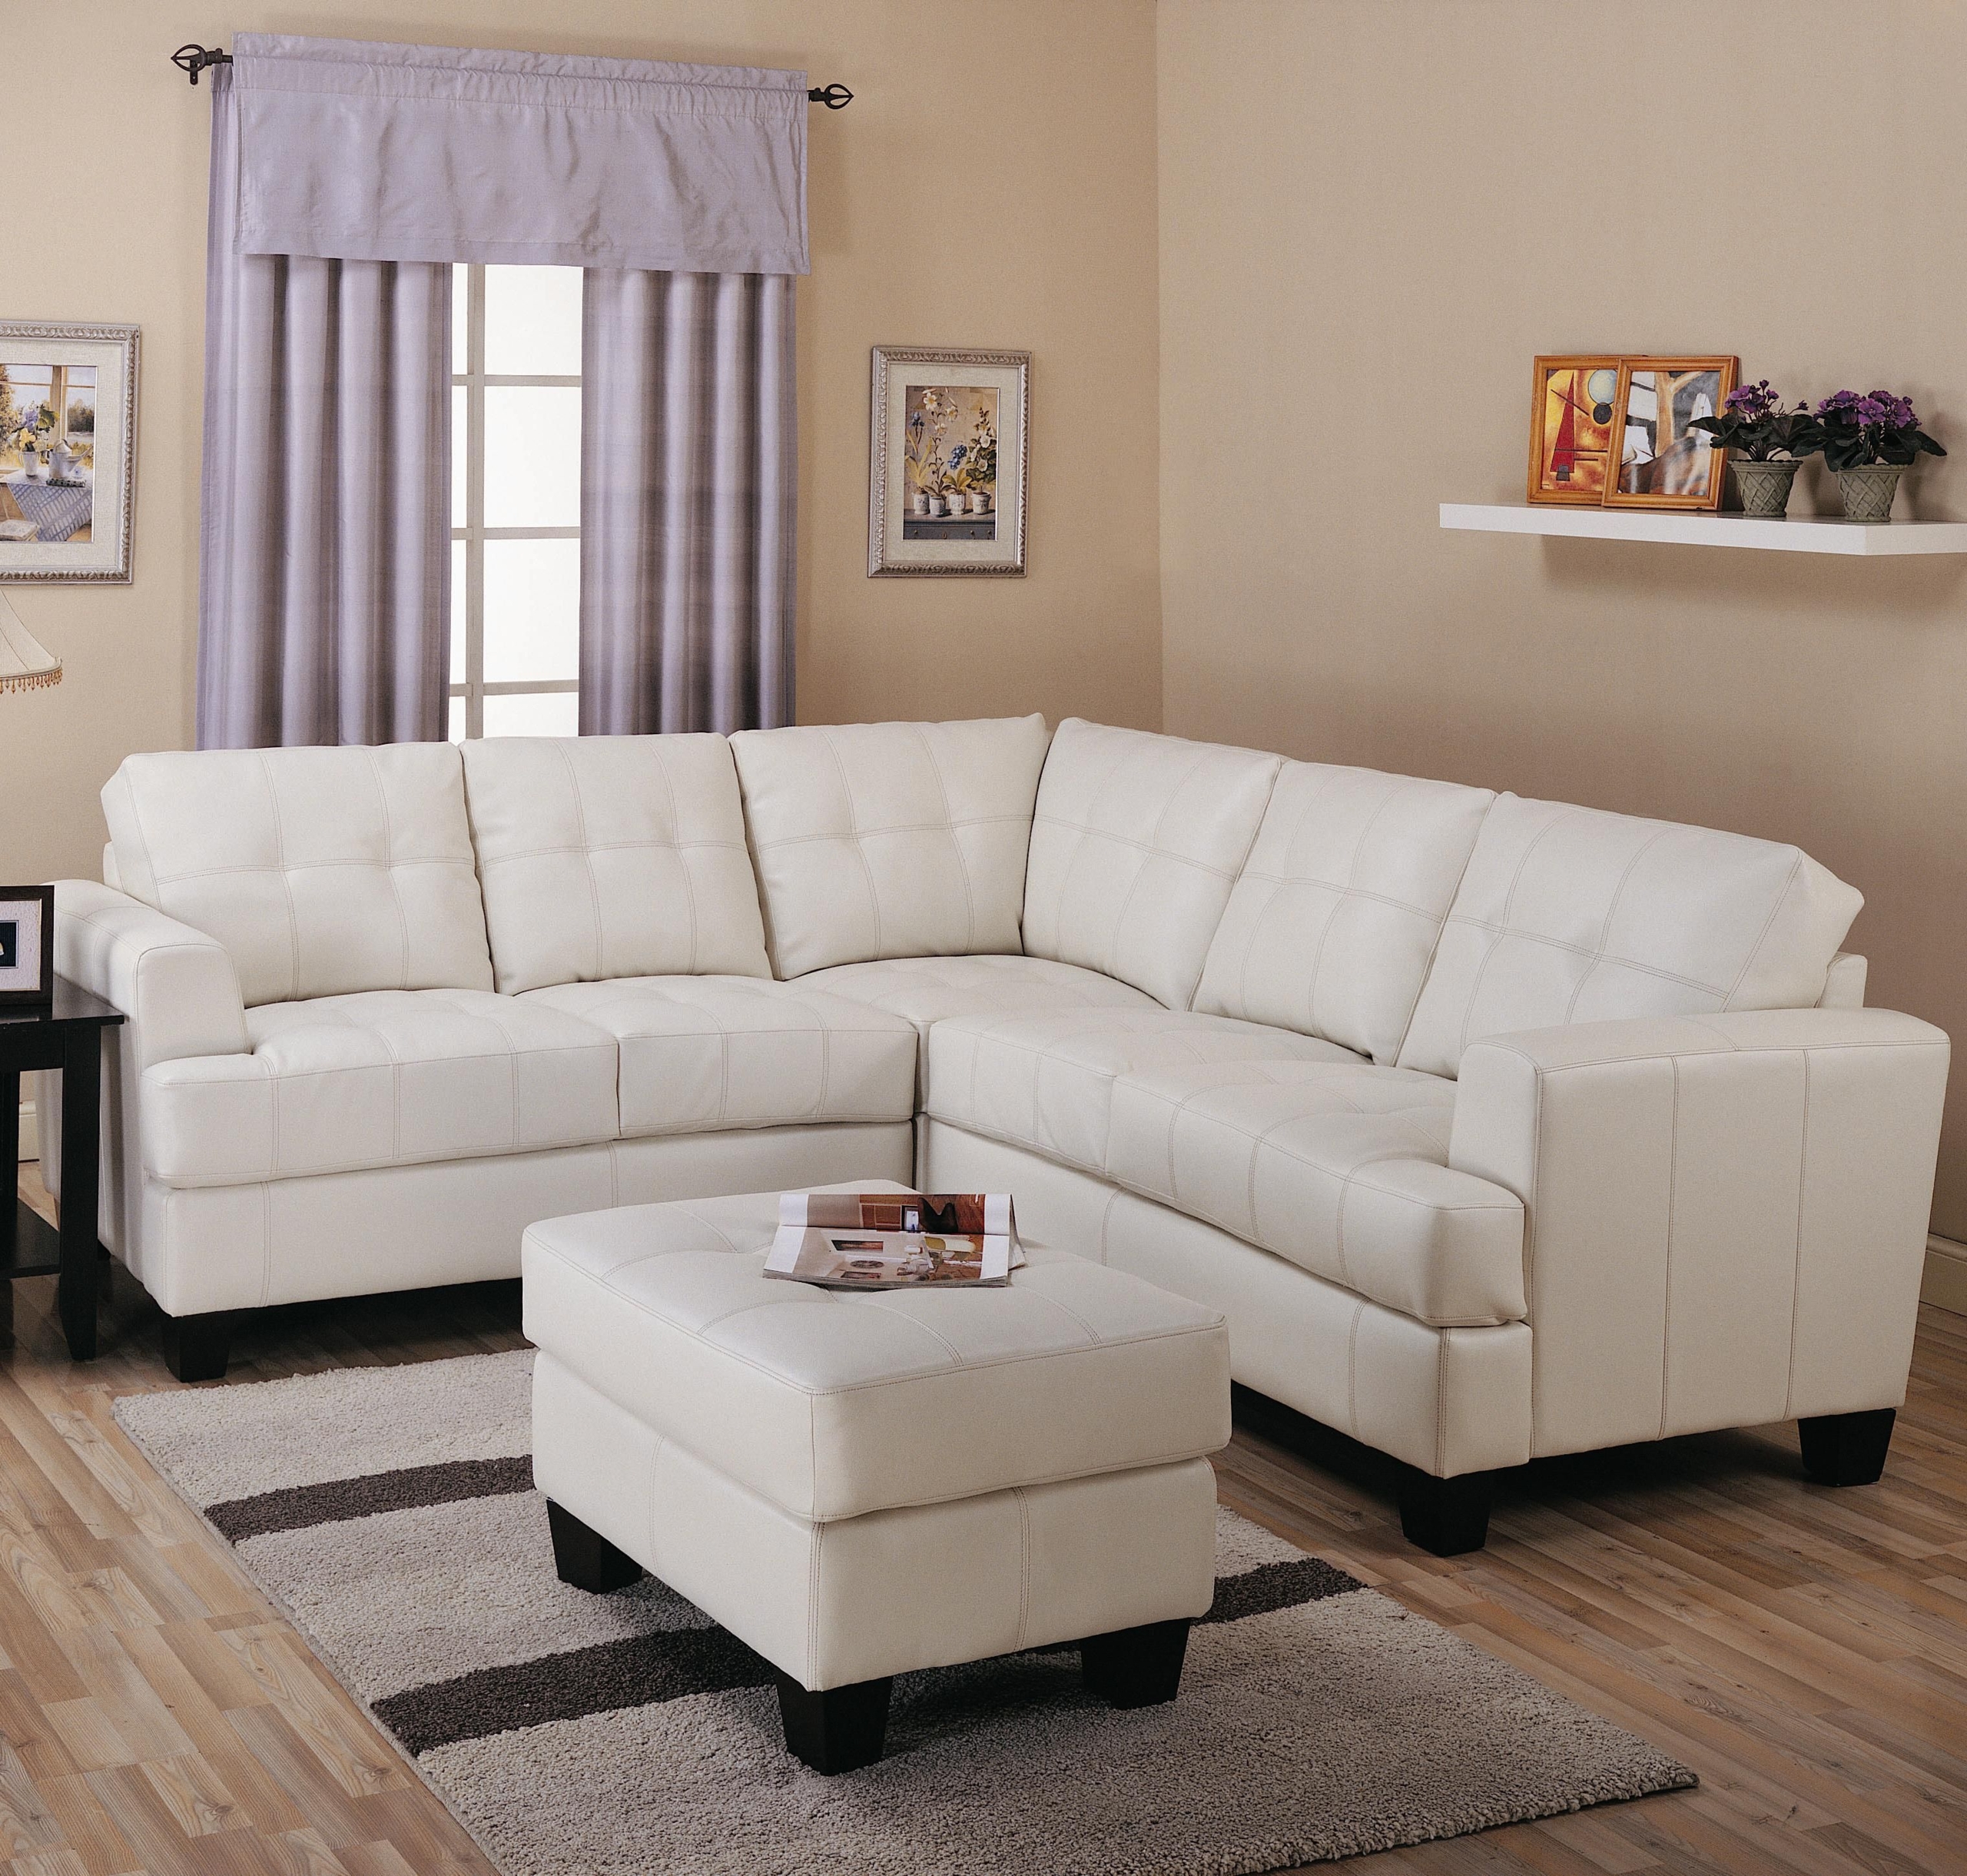 Show details for bella white leather sectional